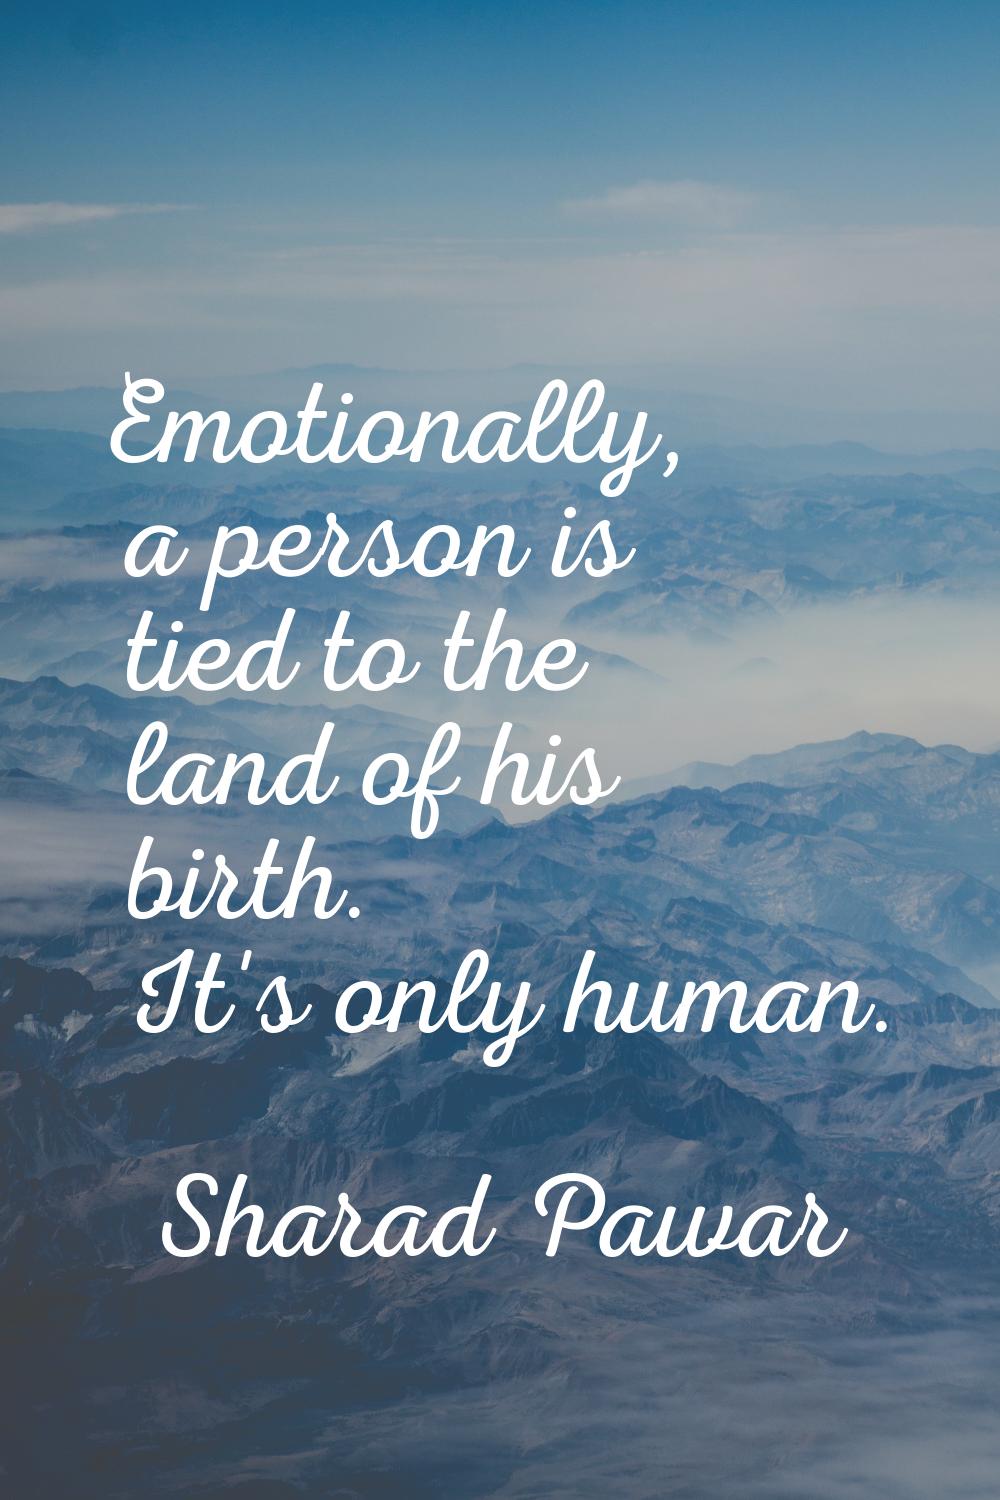 Emotionally, a person is tied to the land of his birth. It's only human.